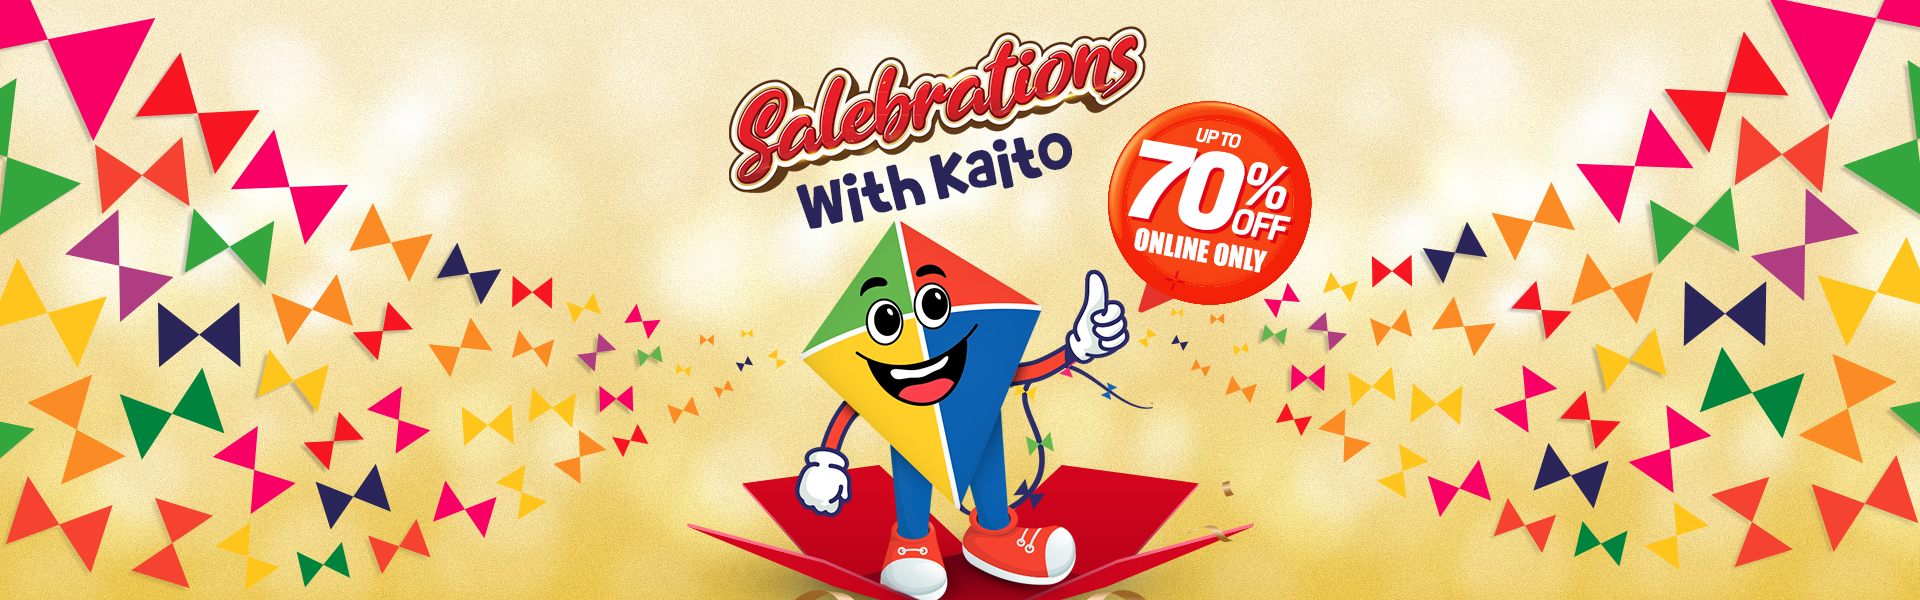 salebaration with kaito, 70% offer